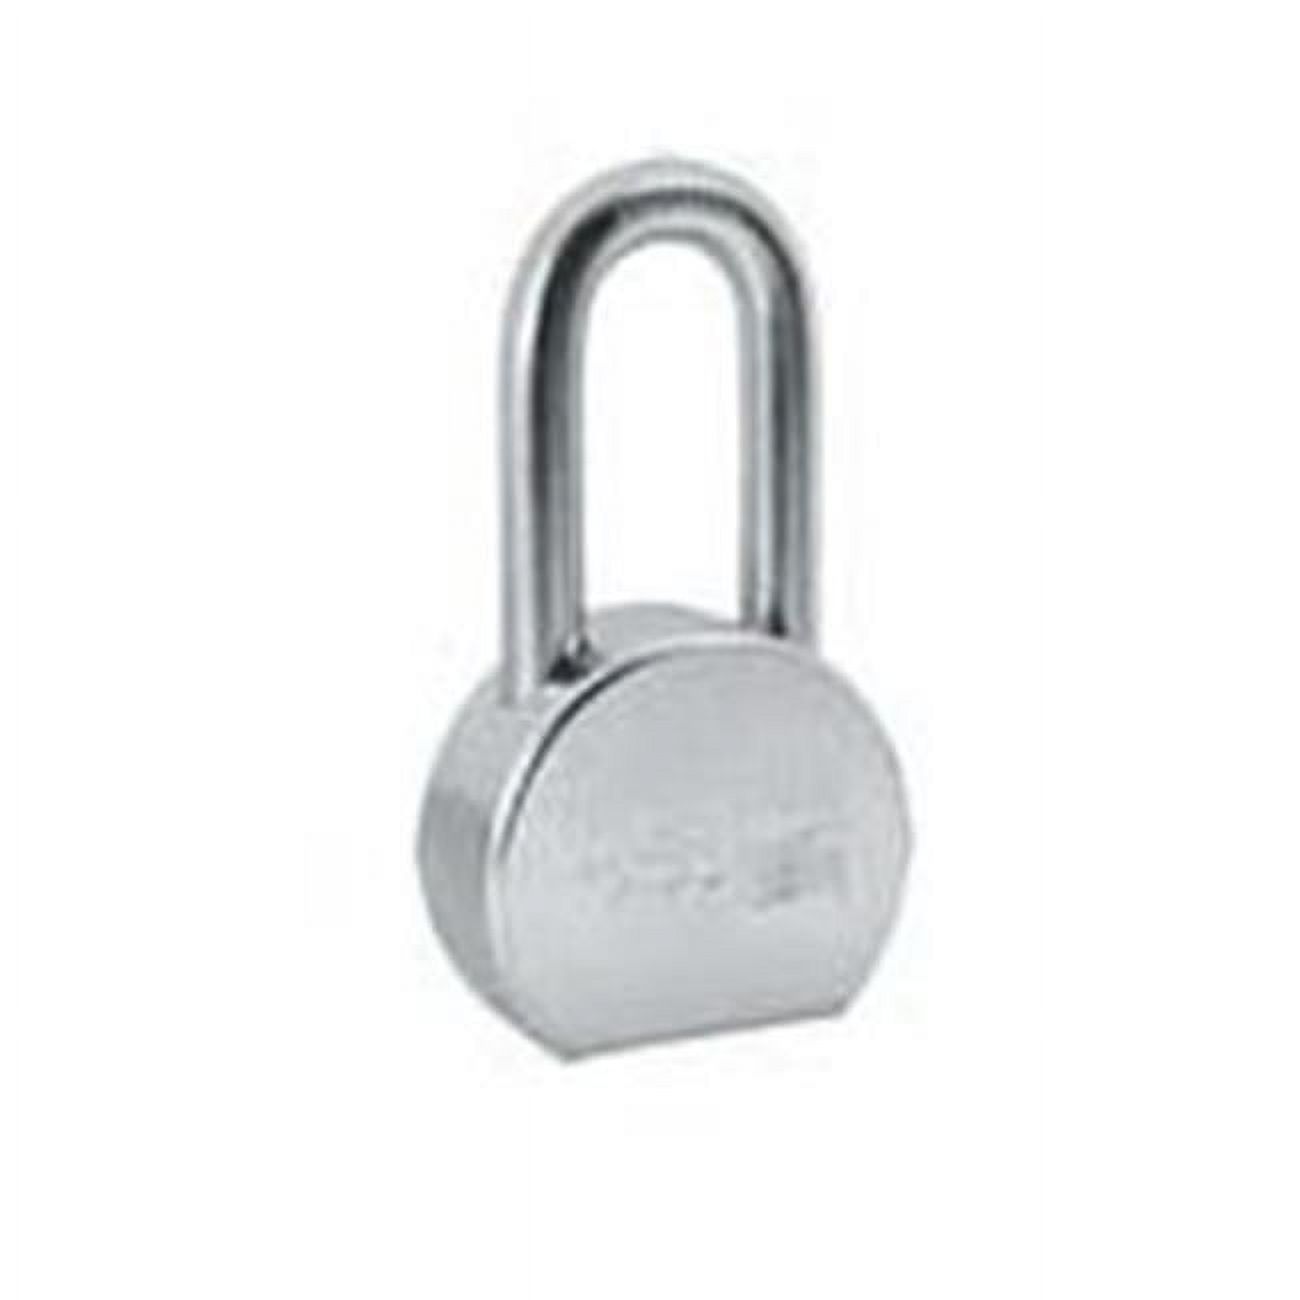 Master Lock 1158930 Shackle Zinc Plated Steel - 2 In. - image 1 of 2